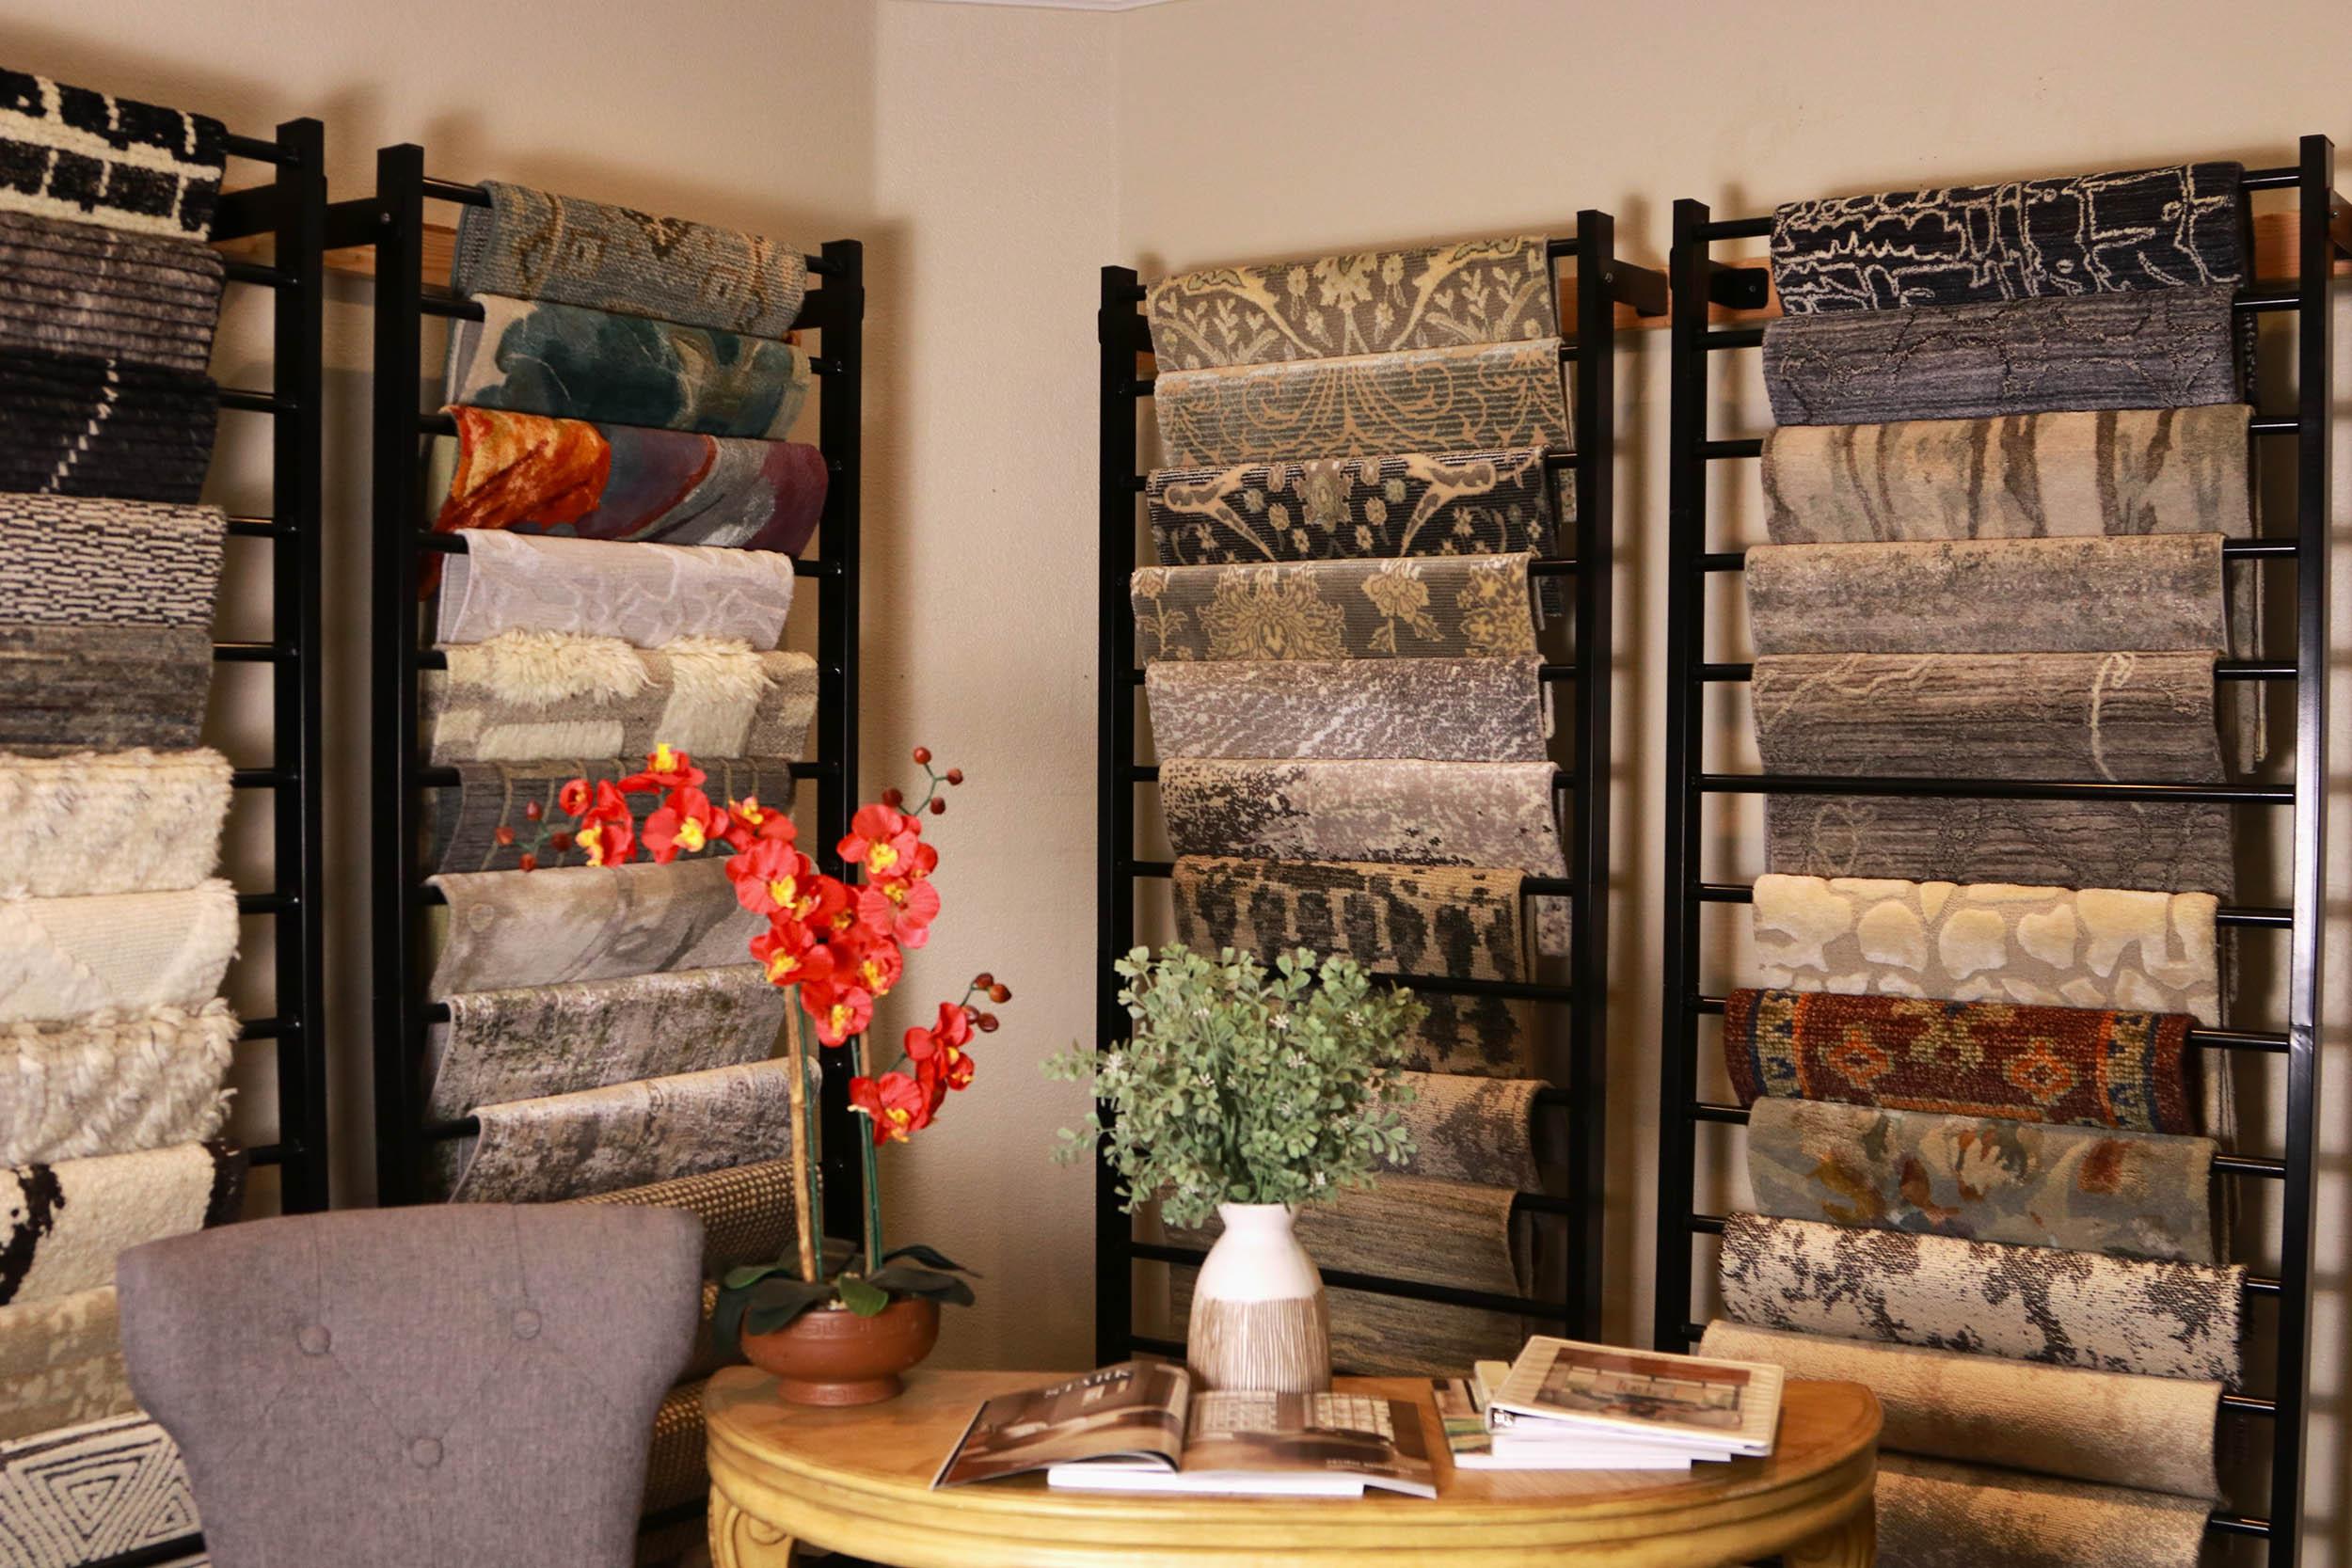 New Rug Collections Hand-Curated for Santa Rosa and San Rafael